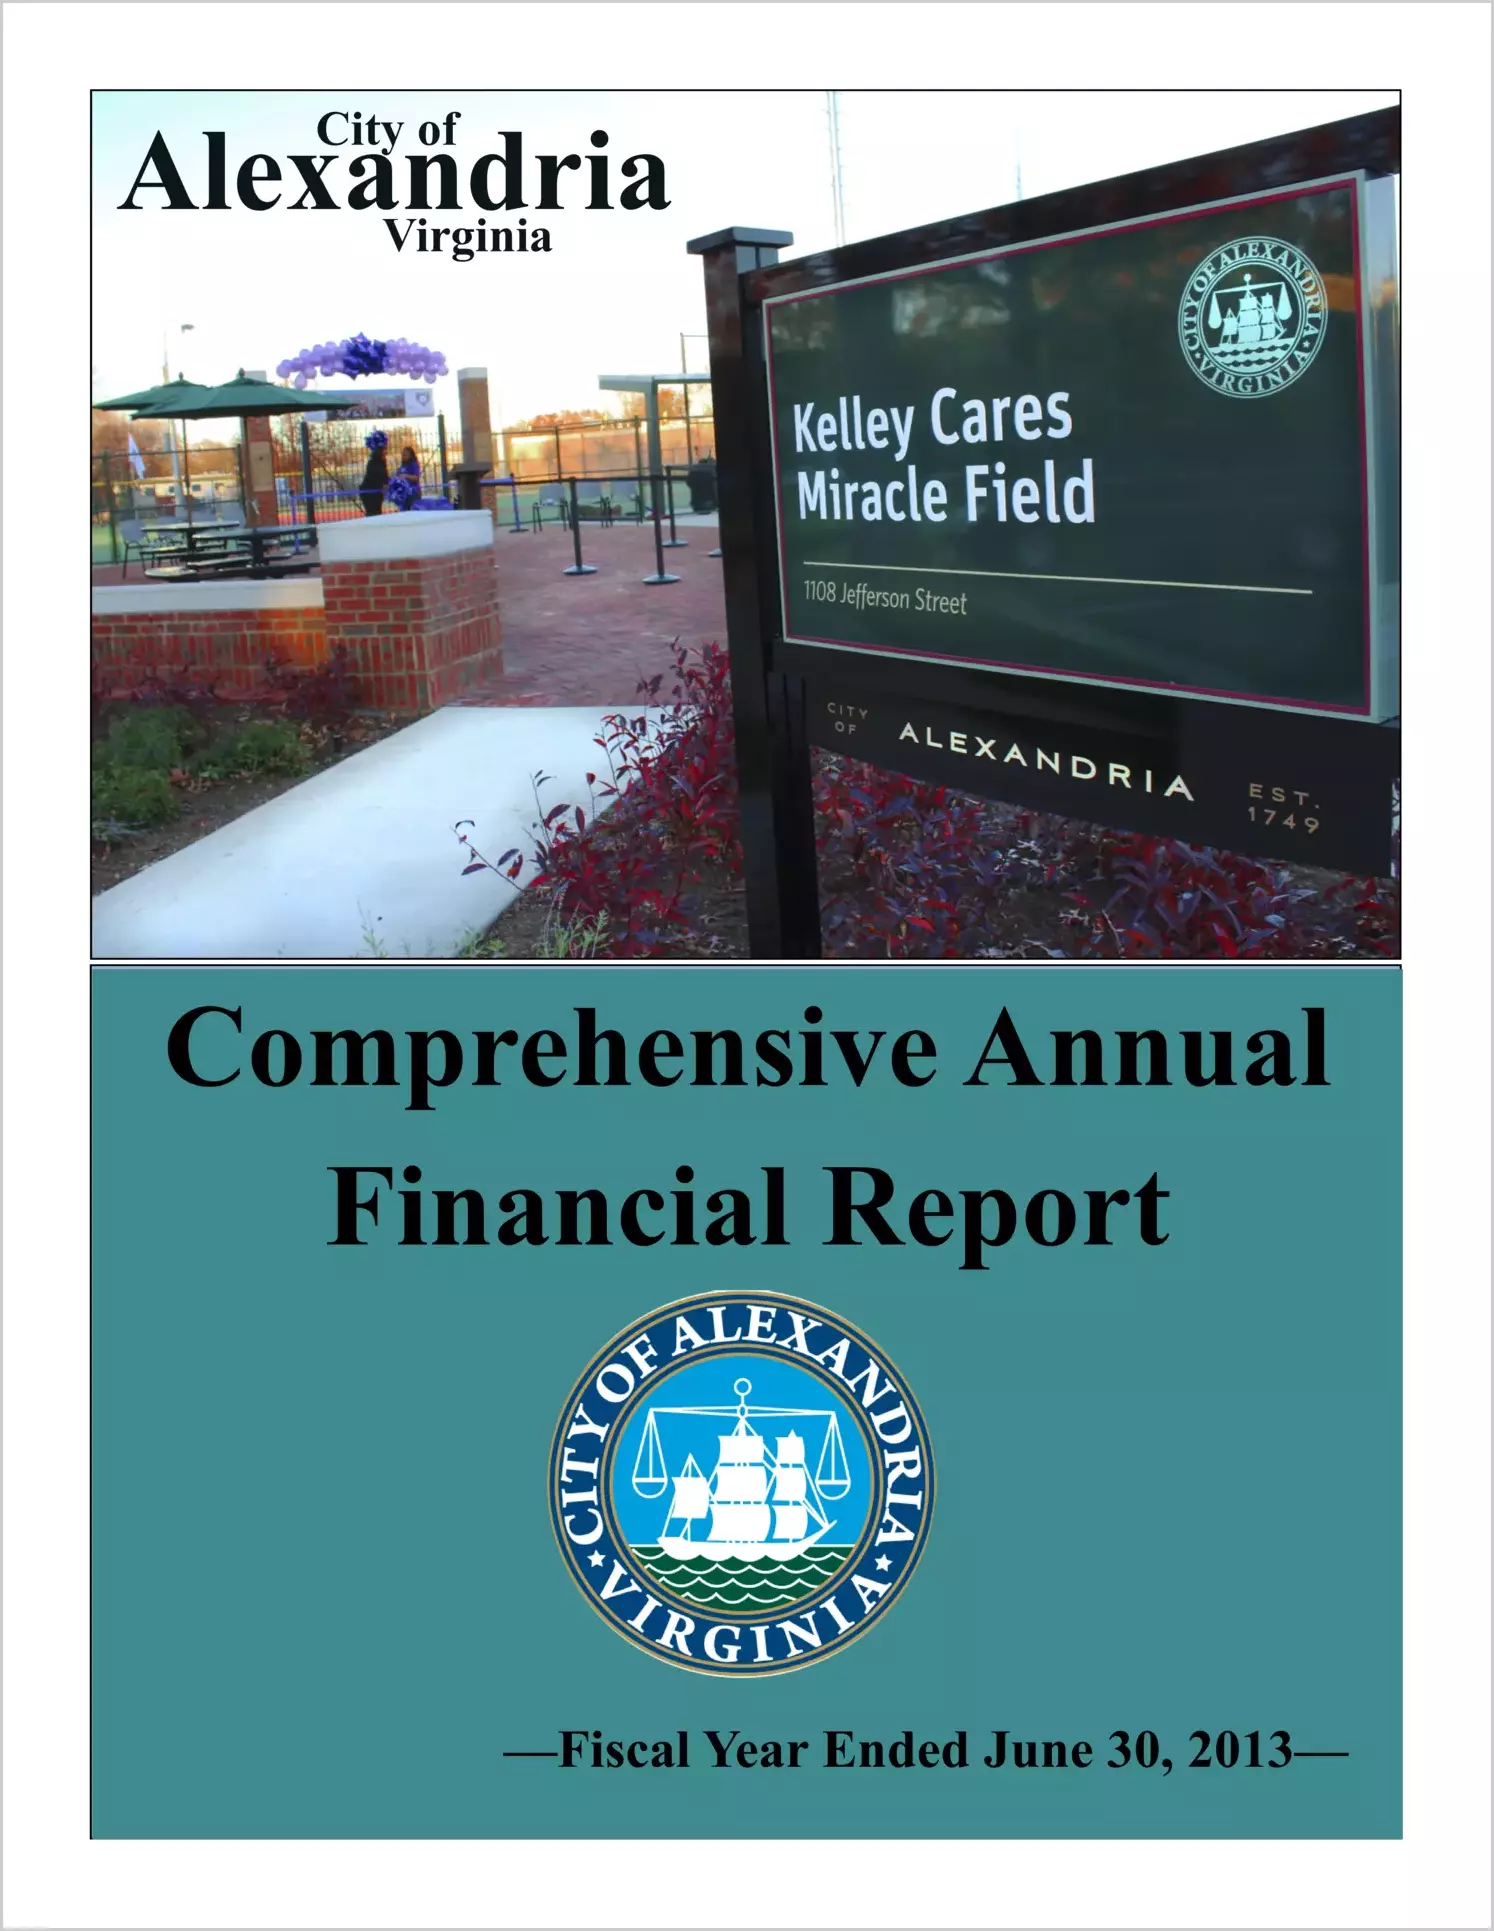 2013 Annual Financial Report for City of Alexandria